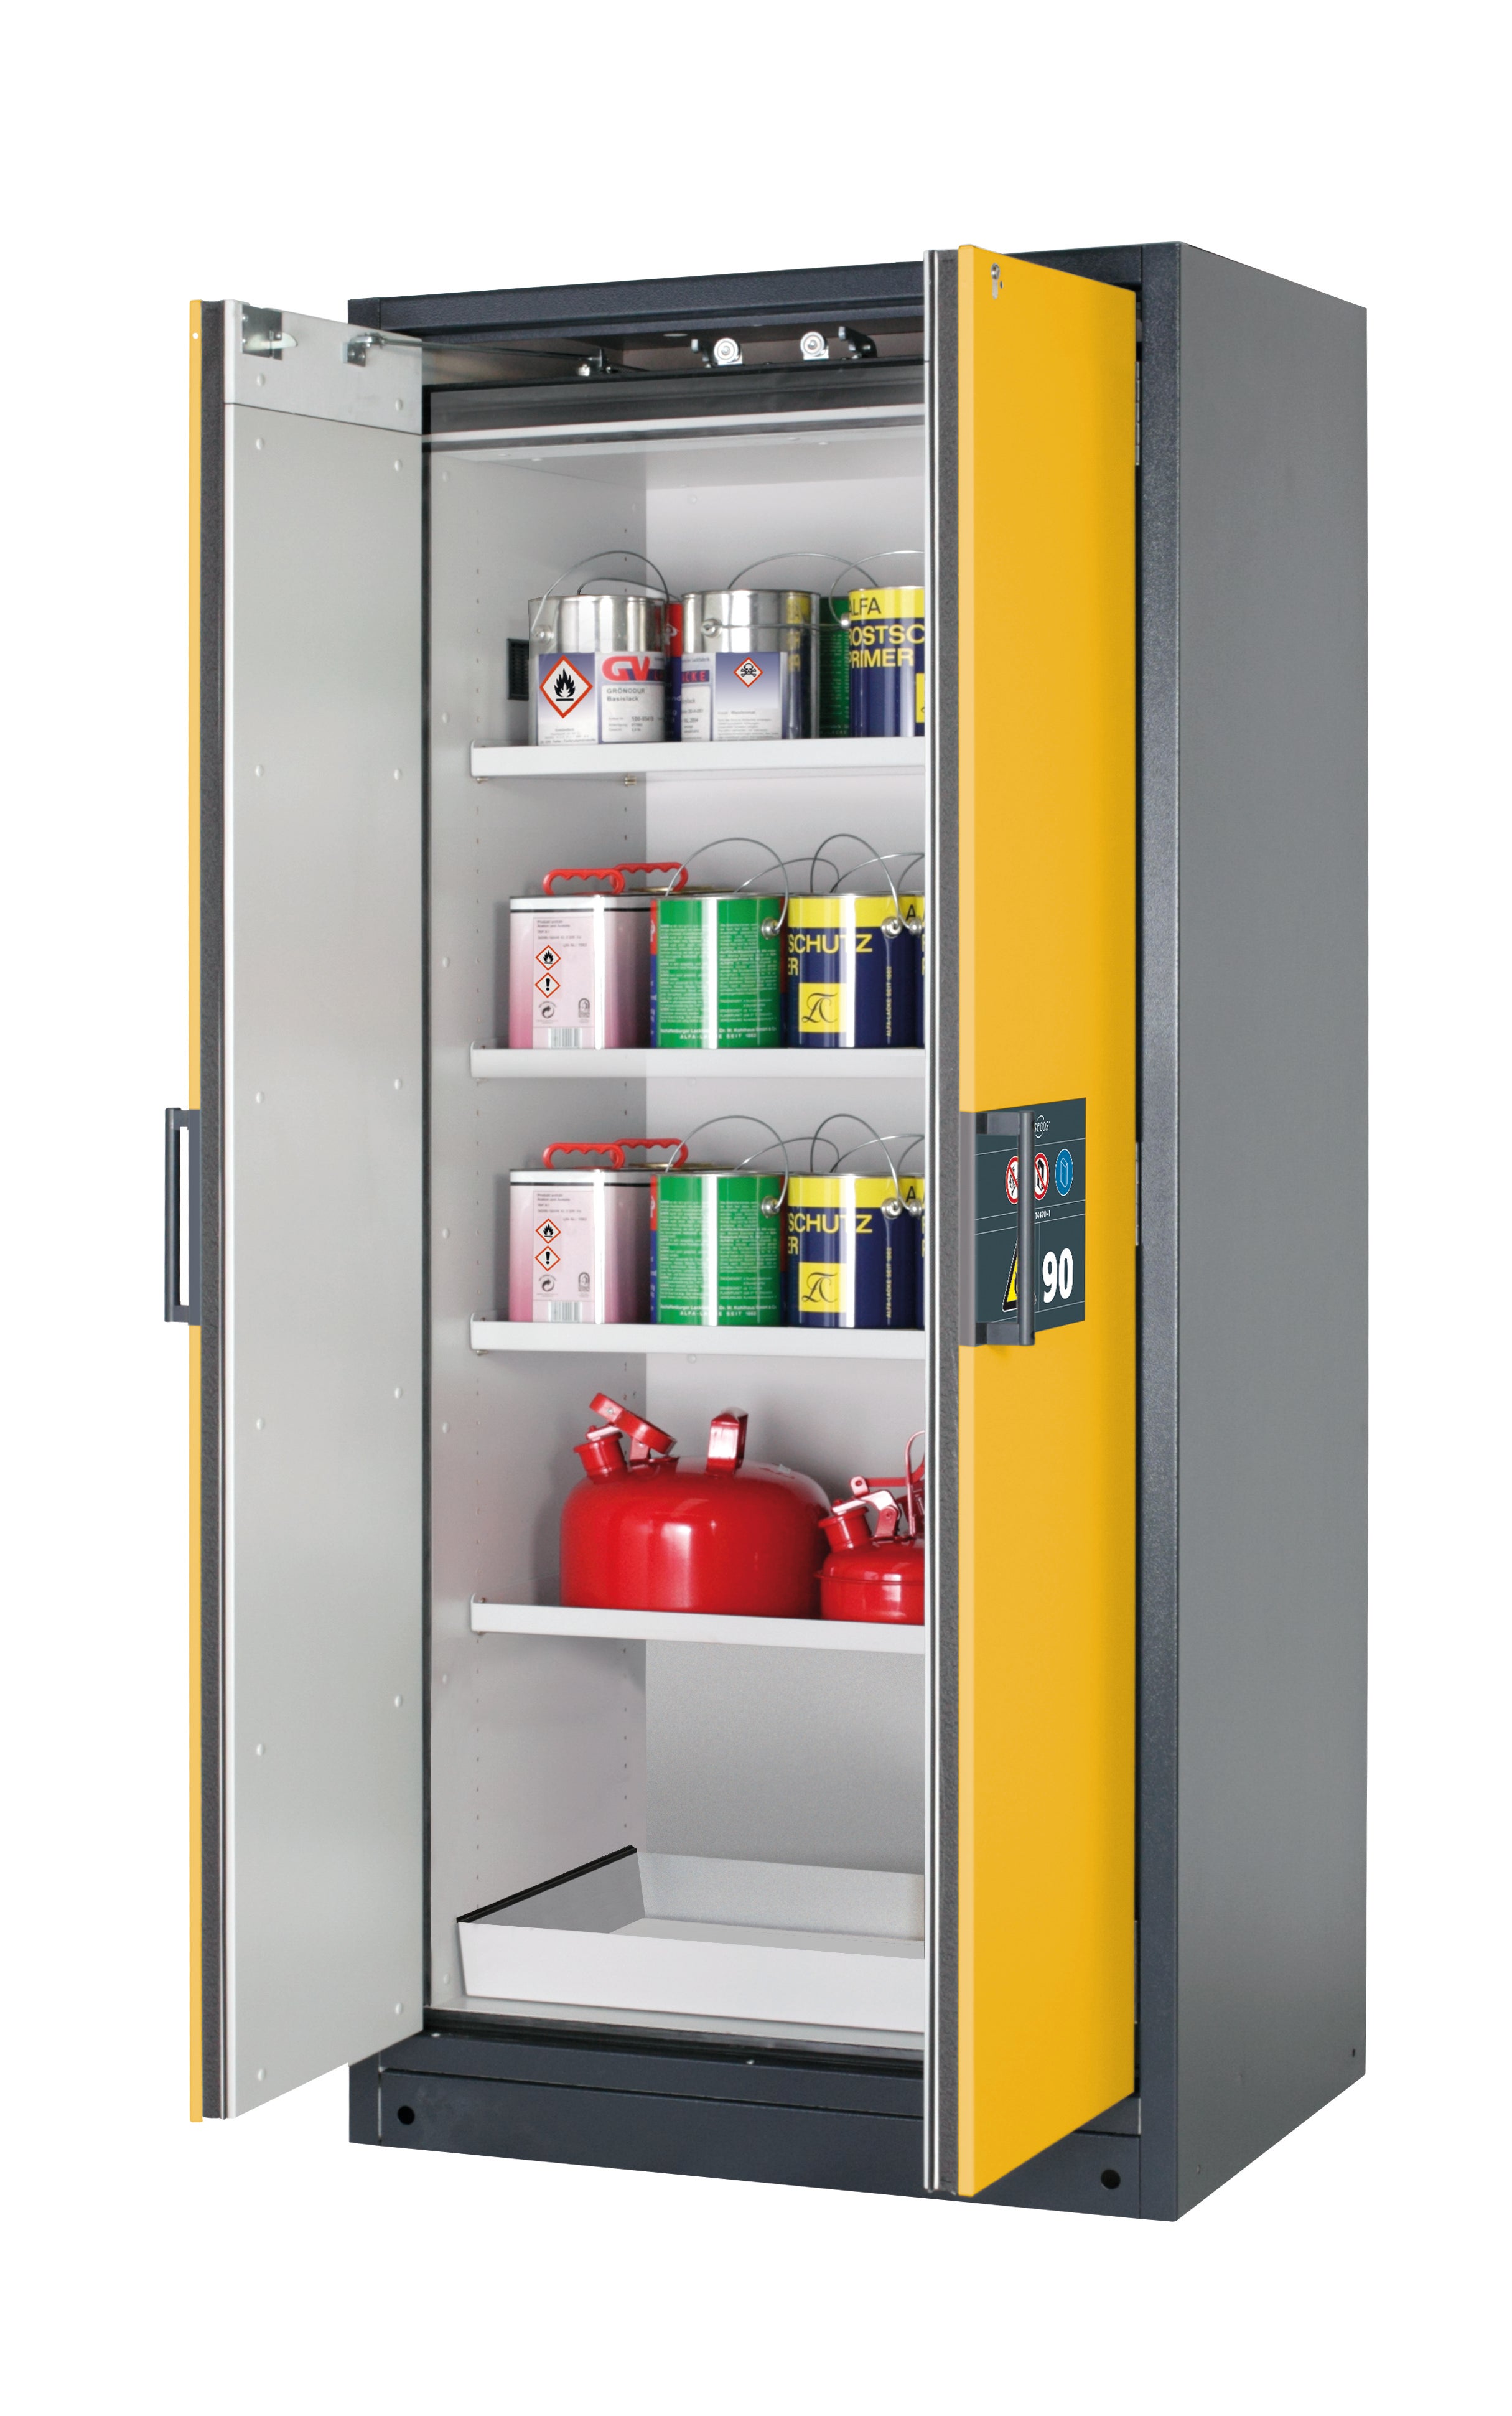 Type 90 safety storage cabinet Q-CLASSIC-90 model Q90.195.090 in warning yellow RAL 1004 with 4x shelf standard (sheet steel),